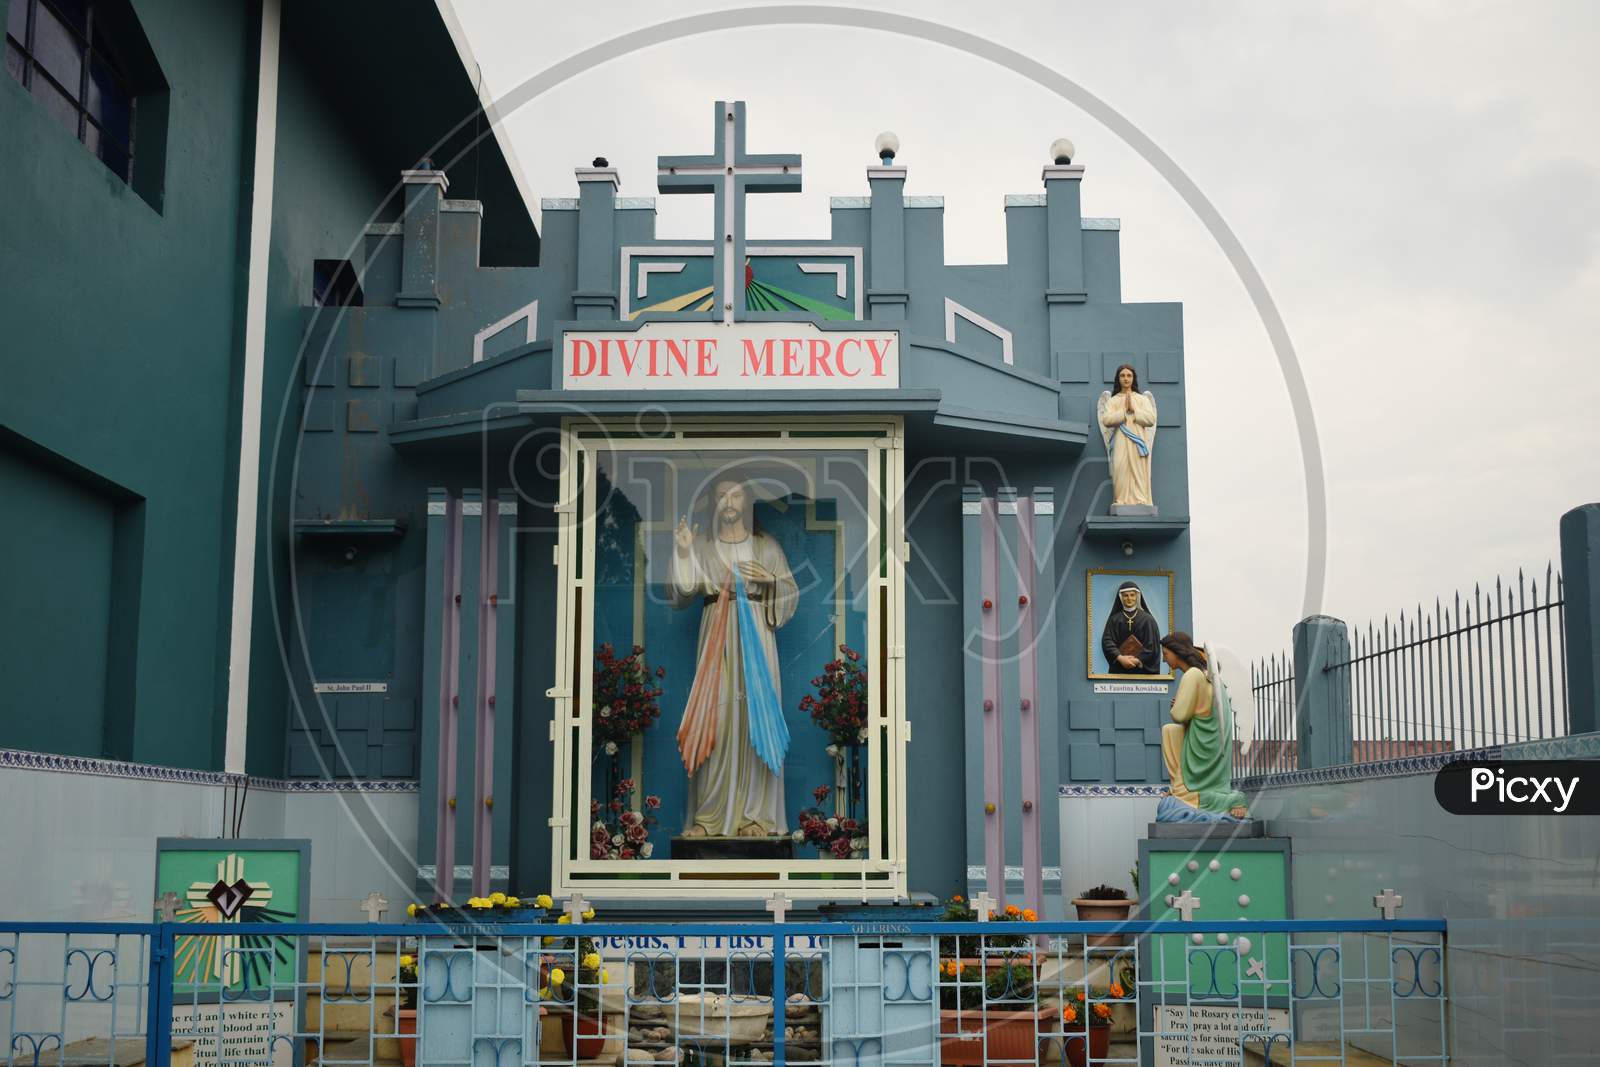 Divine Mercy In The Cathedral of Mary Help of Christians